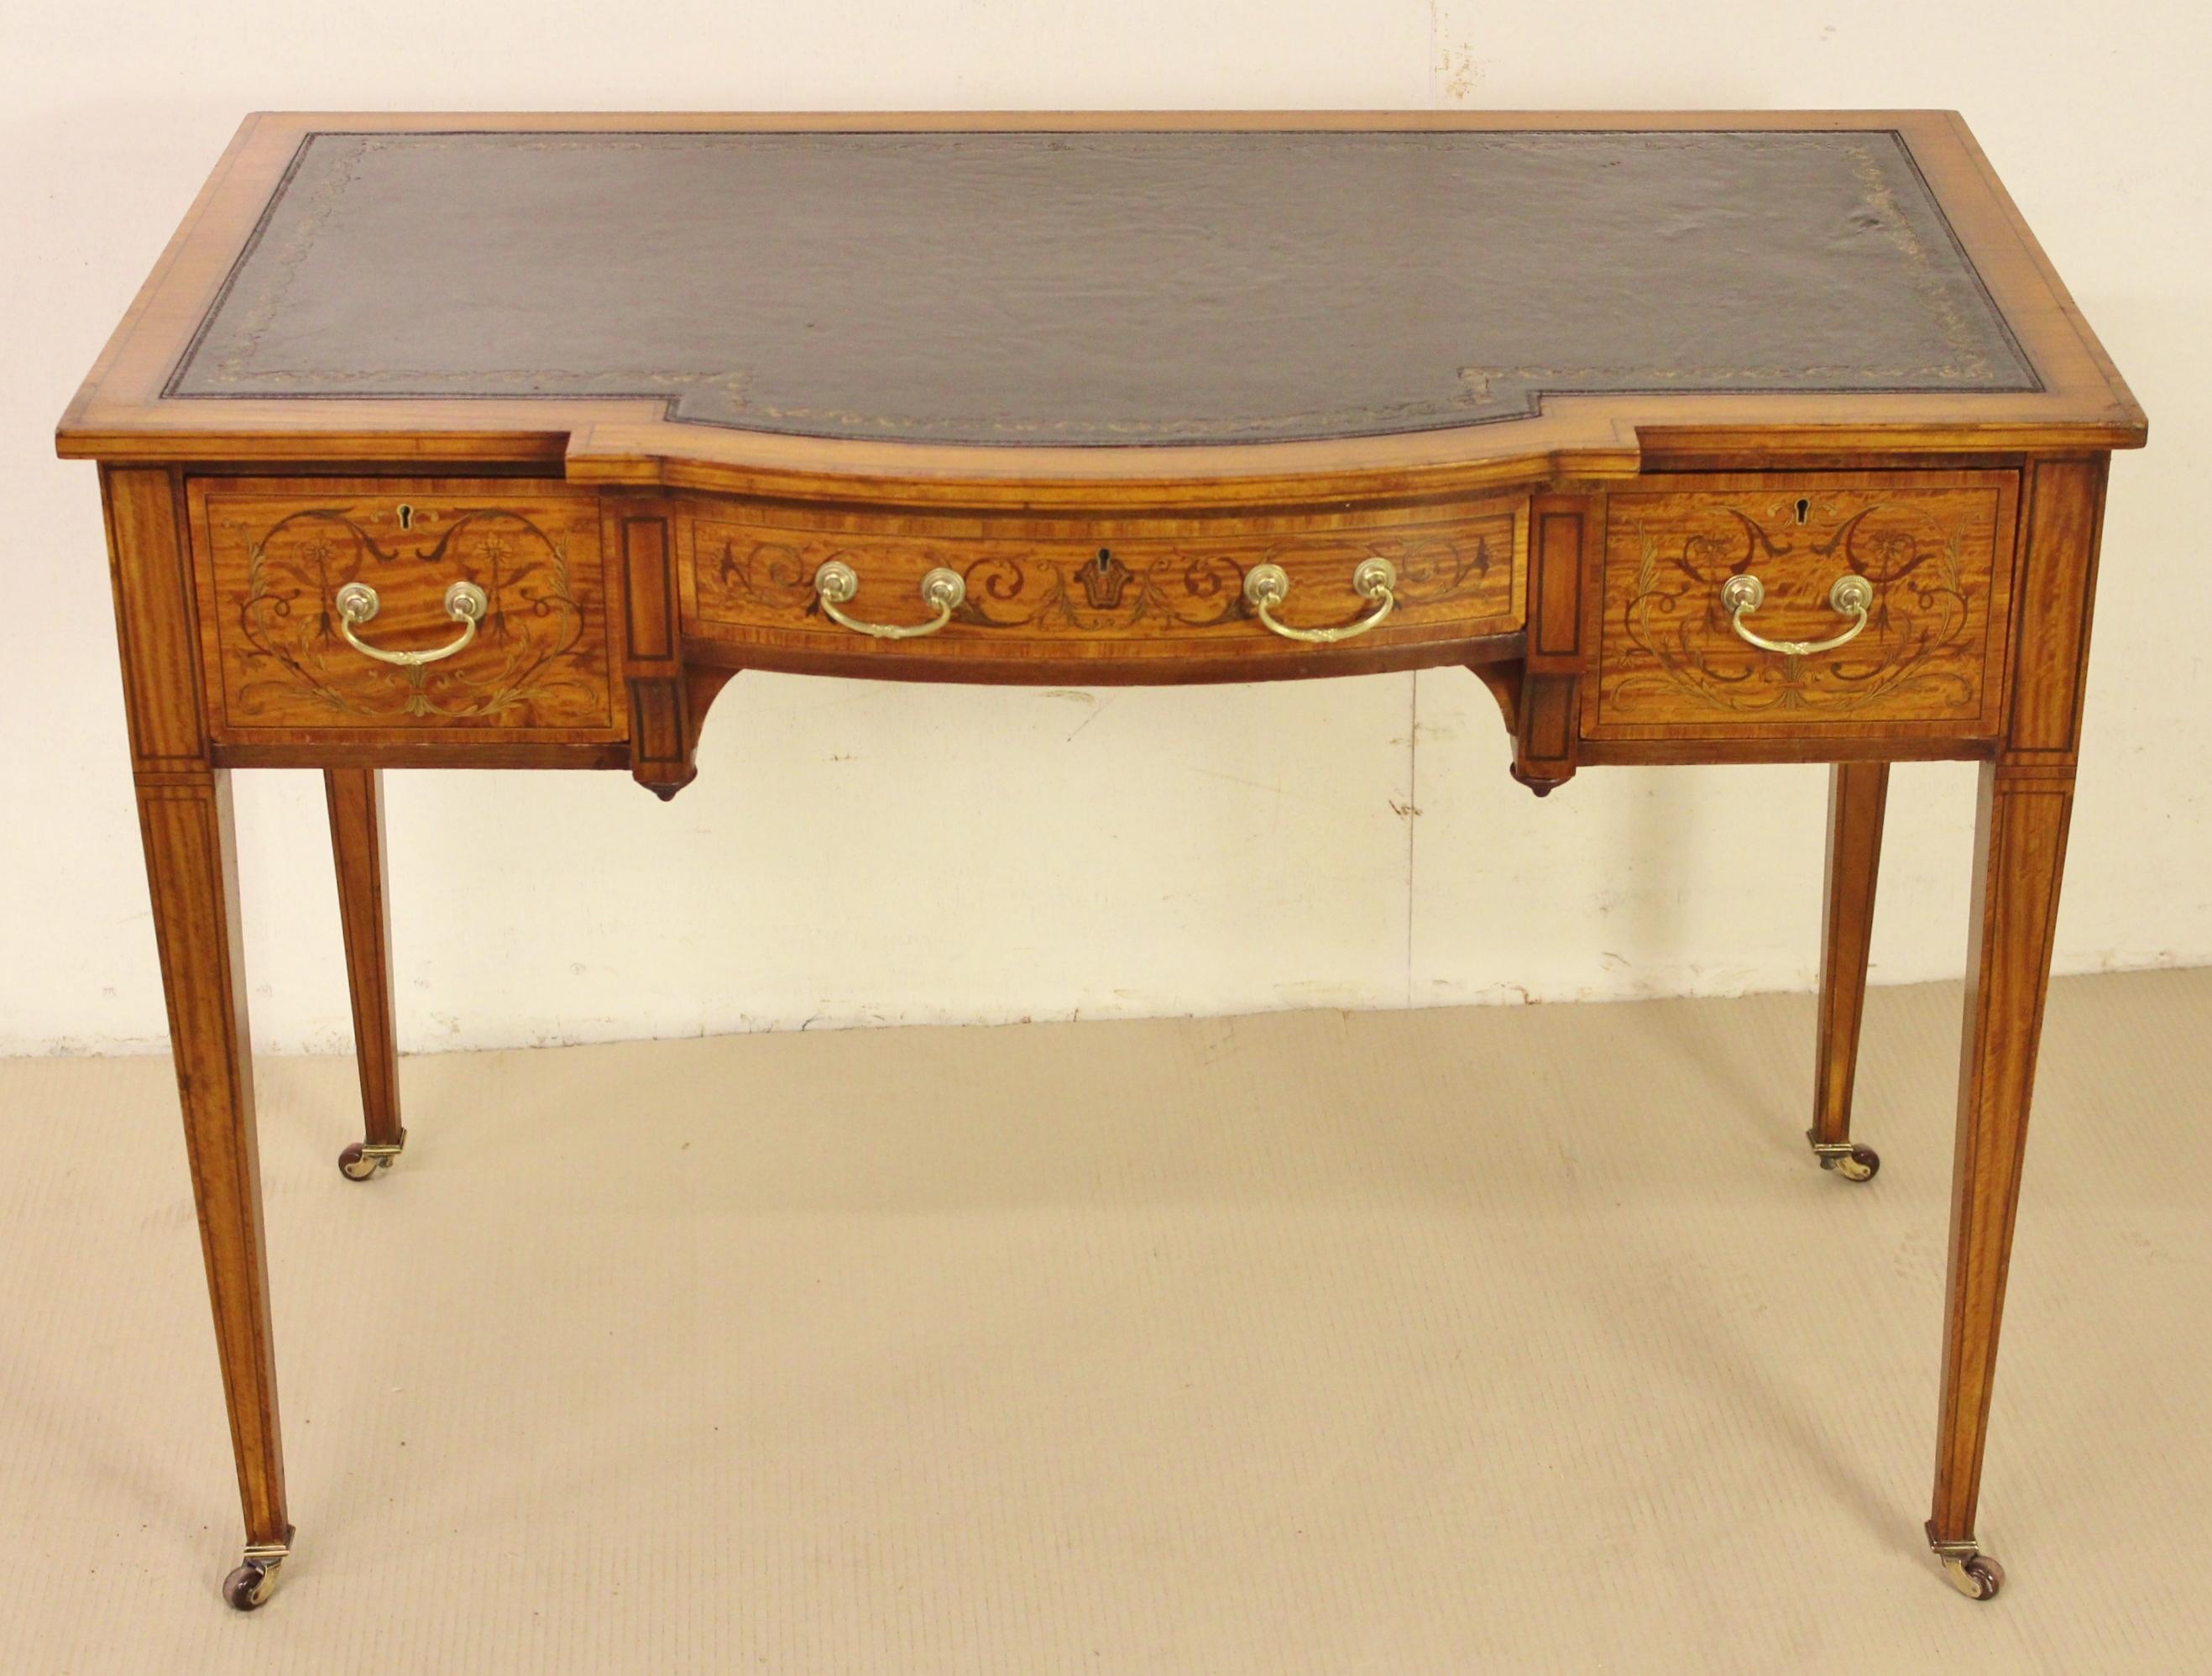 A fine quality inlaid satinwood writing table by the prestigious firm of Maple and Co of London. Dating to the late Victorian period and very well made with stunning satinwood veneers onto a solid mahogany frame. The top and drawer fronts are cross